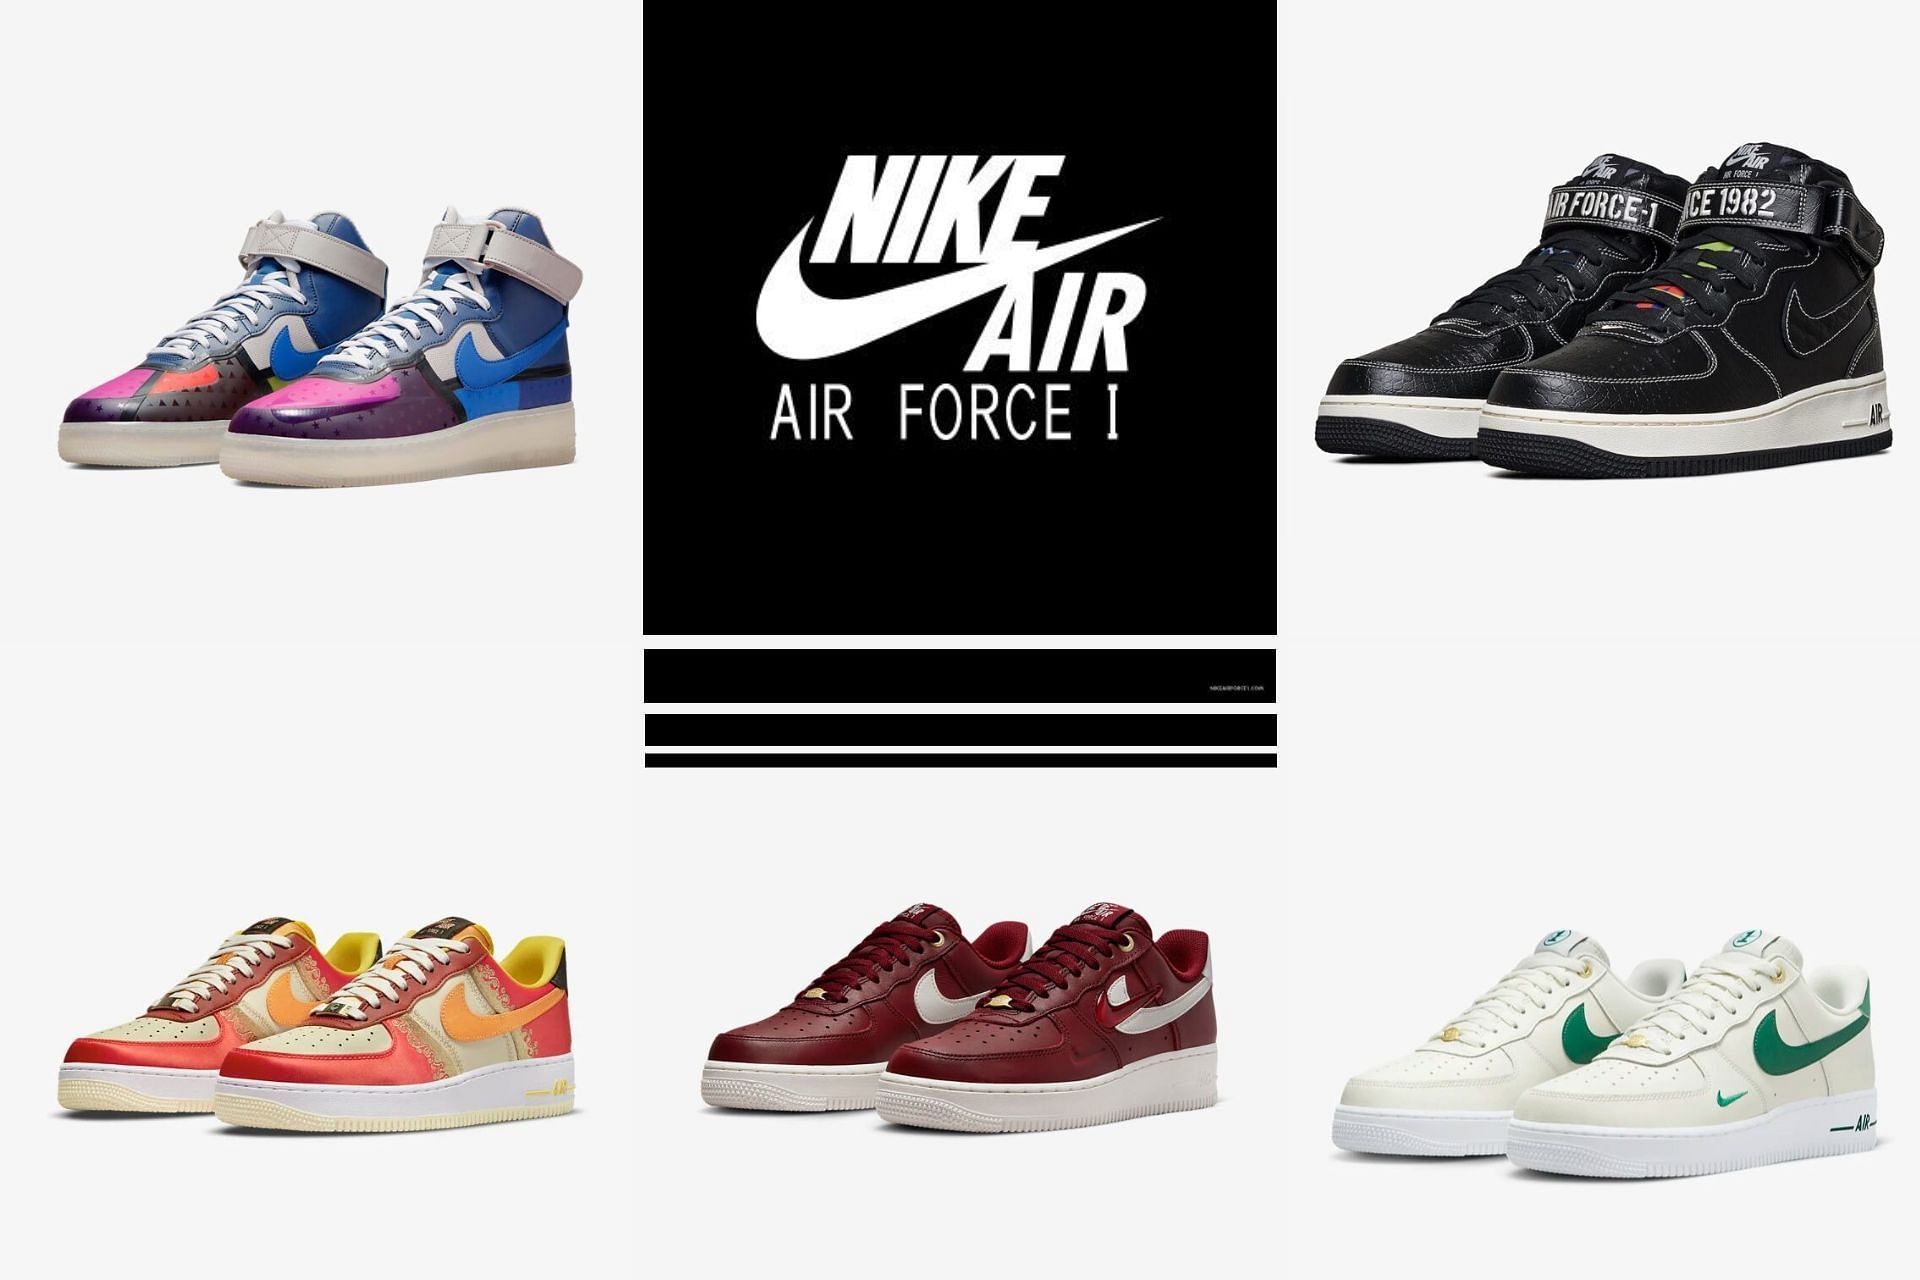 Joven Ciudadano salvar Nike: 5 best Nike Air Force 1 colorways released for 40th anniversary  celebrations of the sneaker model